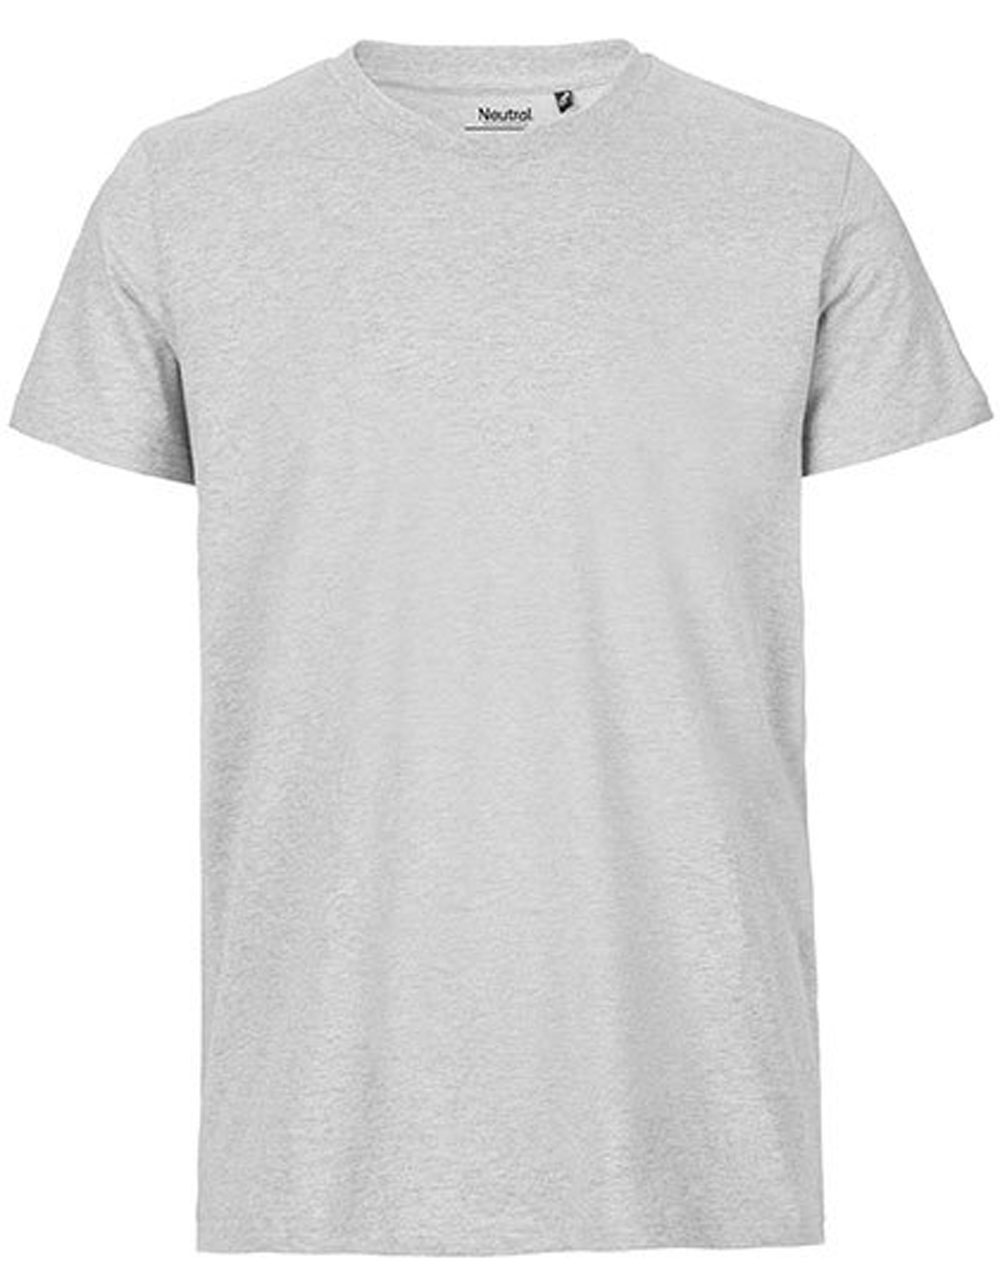 Mens Fitted T-Shirt Neutral 61001